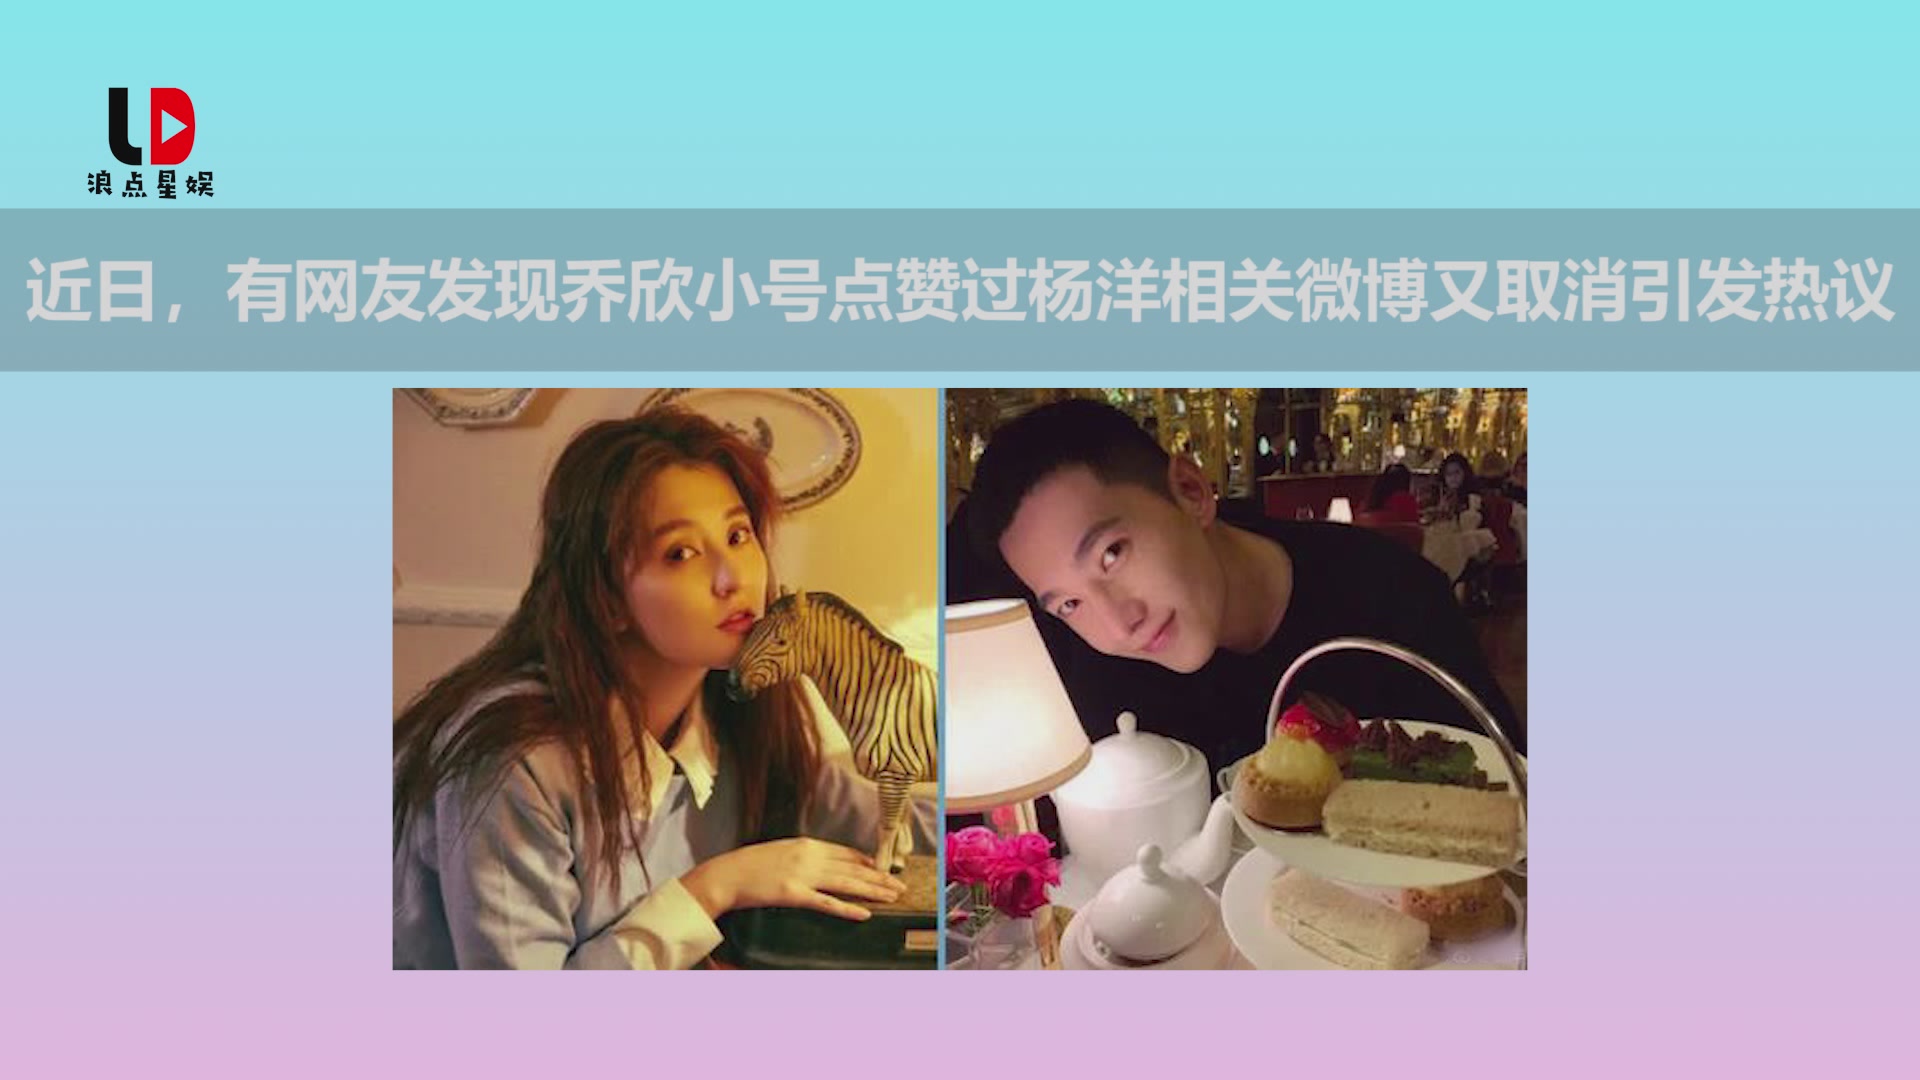 Qiao Xin Yangyang is suspected to be together and both sides deny it.